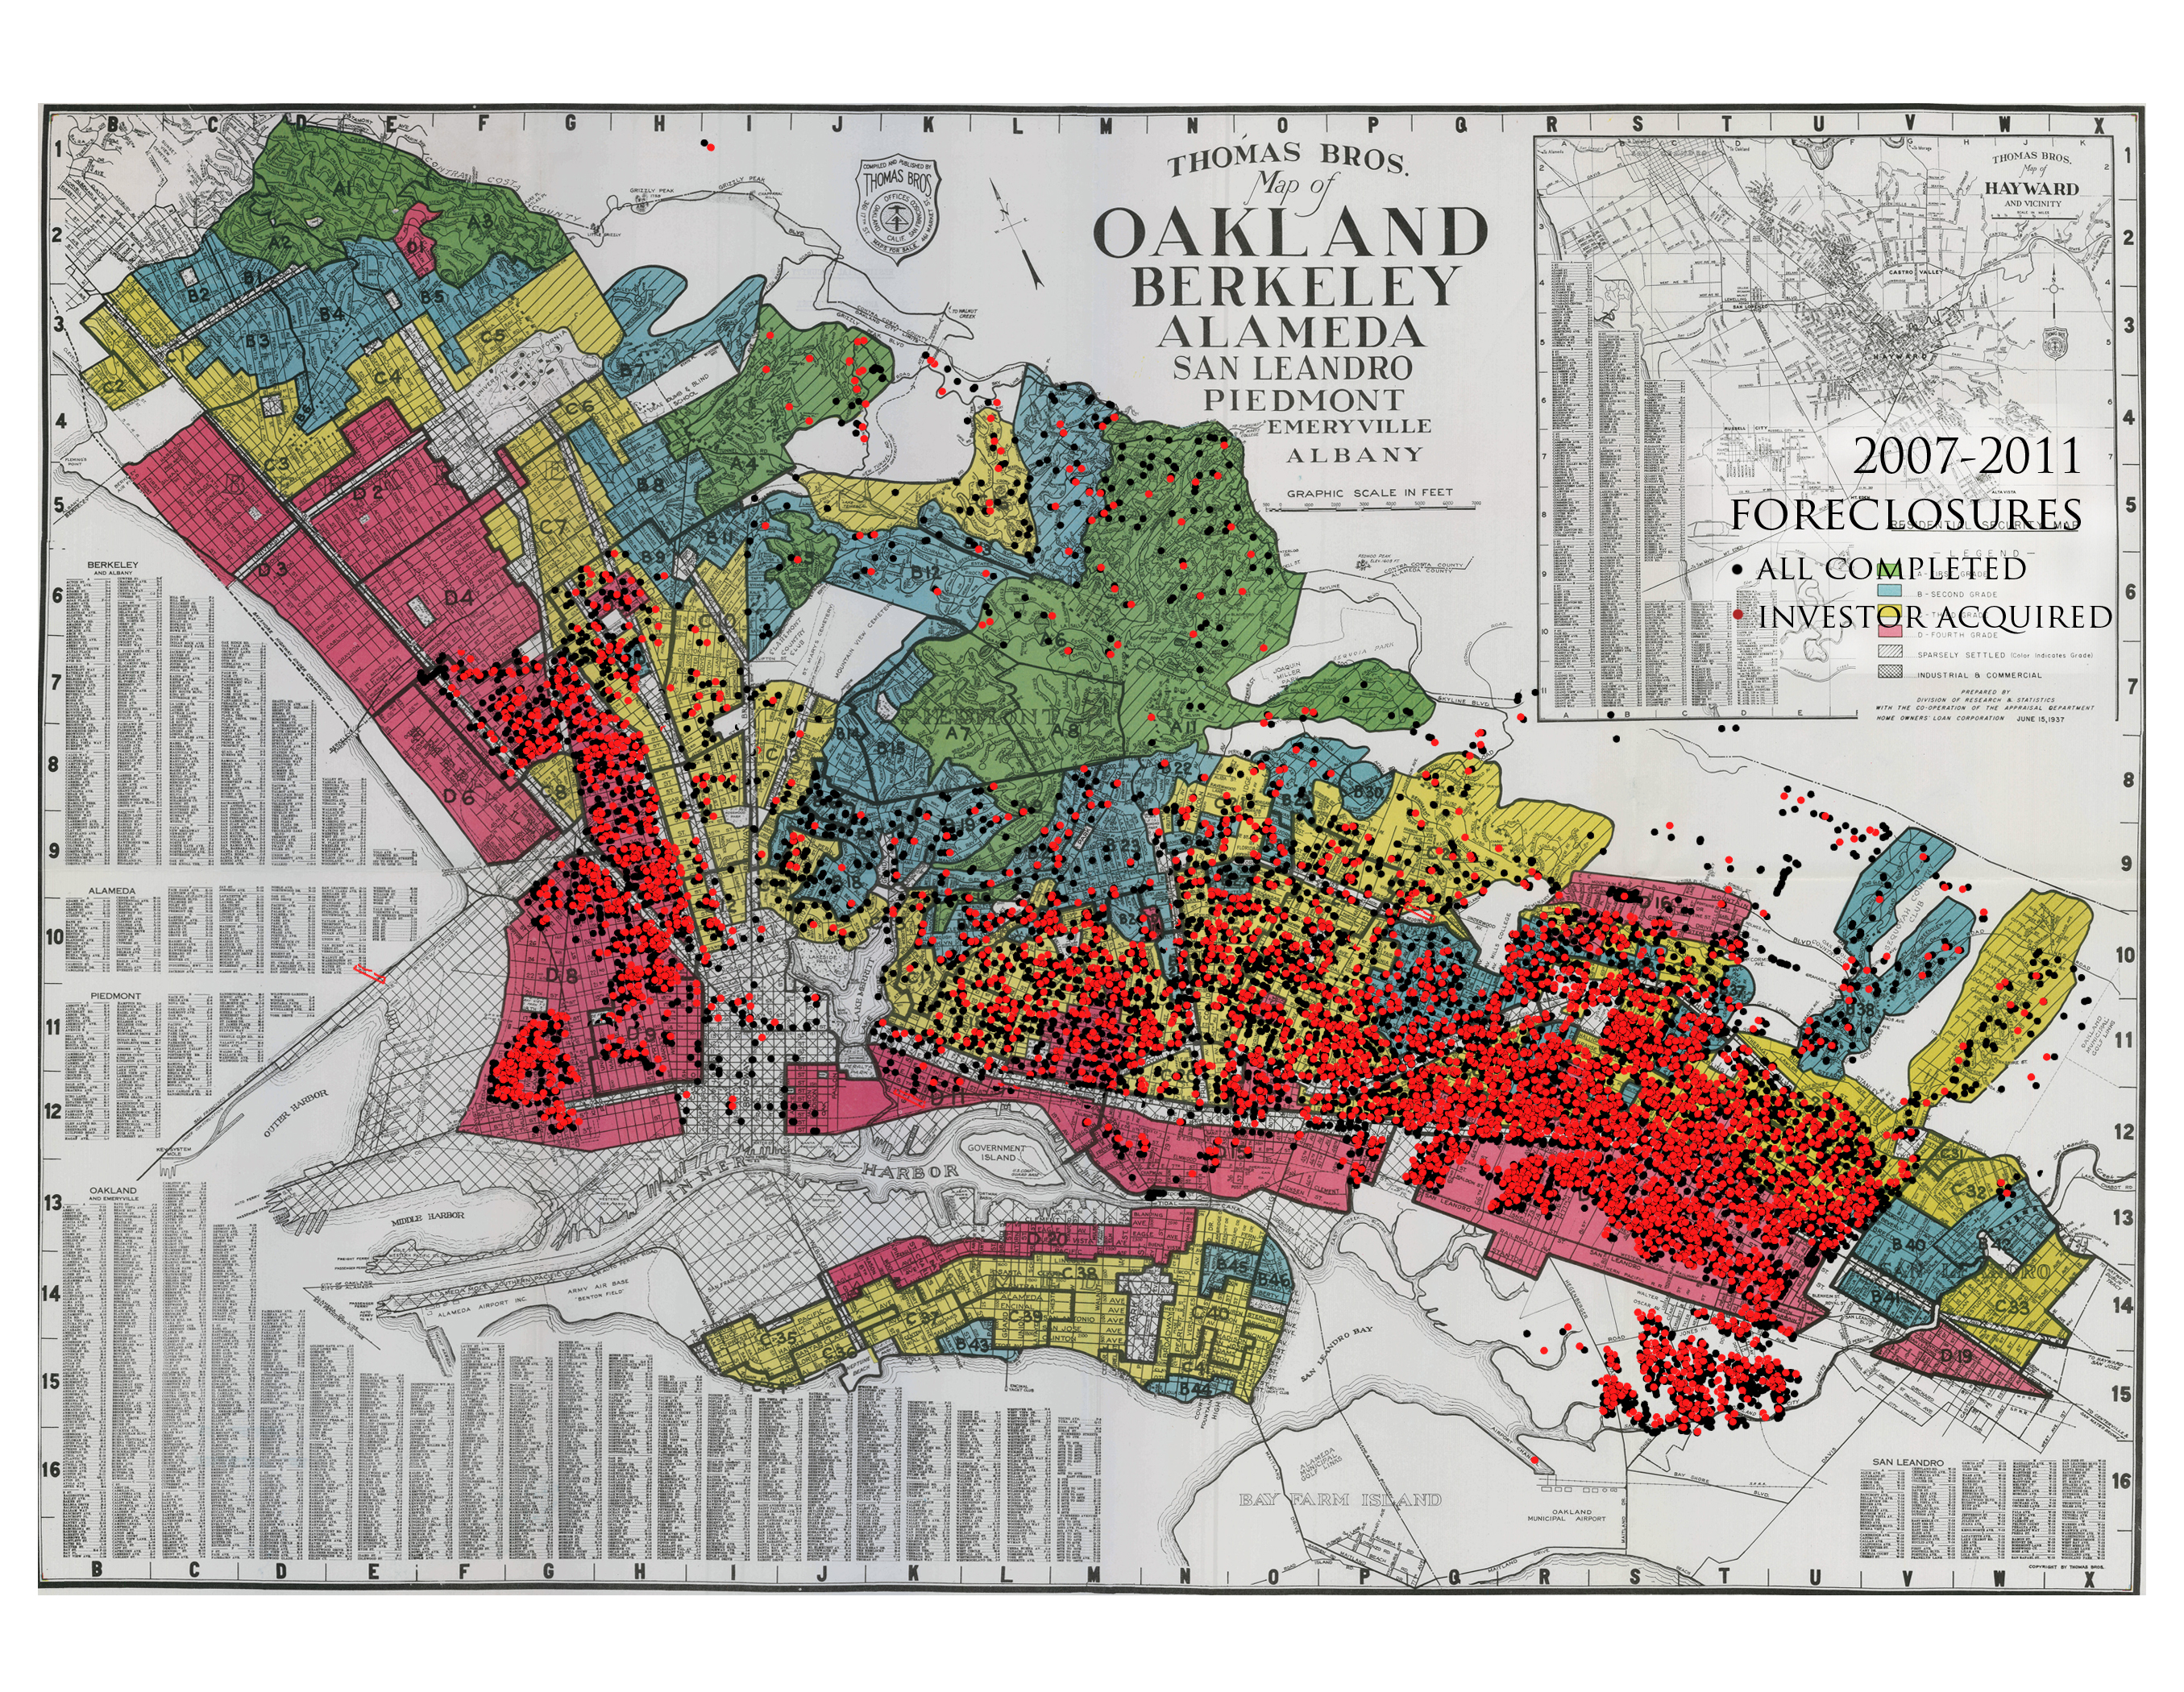 photo: Each dot on this map represents an Oakland property that was foreclosed on between 2007 and 2011. Those marked in red represent foreclosed properties that were later acquired by investors. The vast majority of foreclosures occurred in formerly redlined areas, shaded in this 1937 HOLC map in red (“hazardous”) or yellow (“definitely declining”). Image credit: Evan Bissell